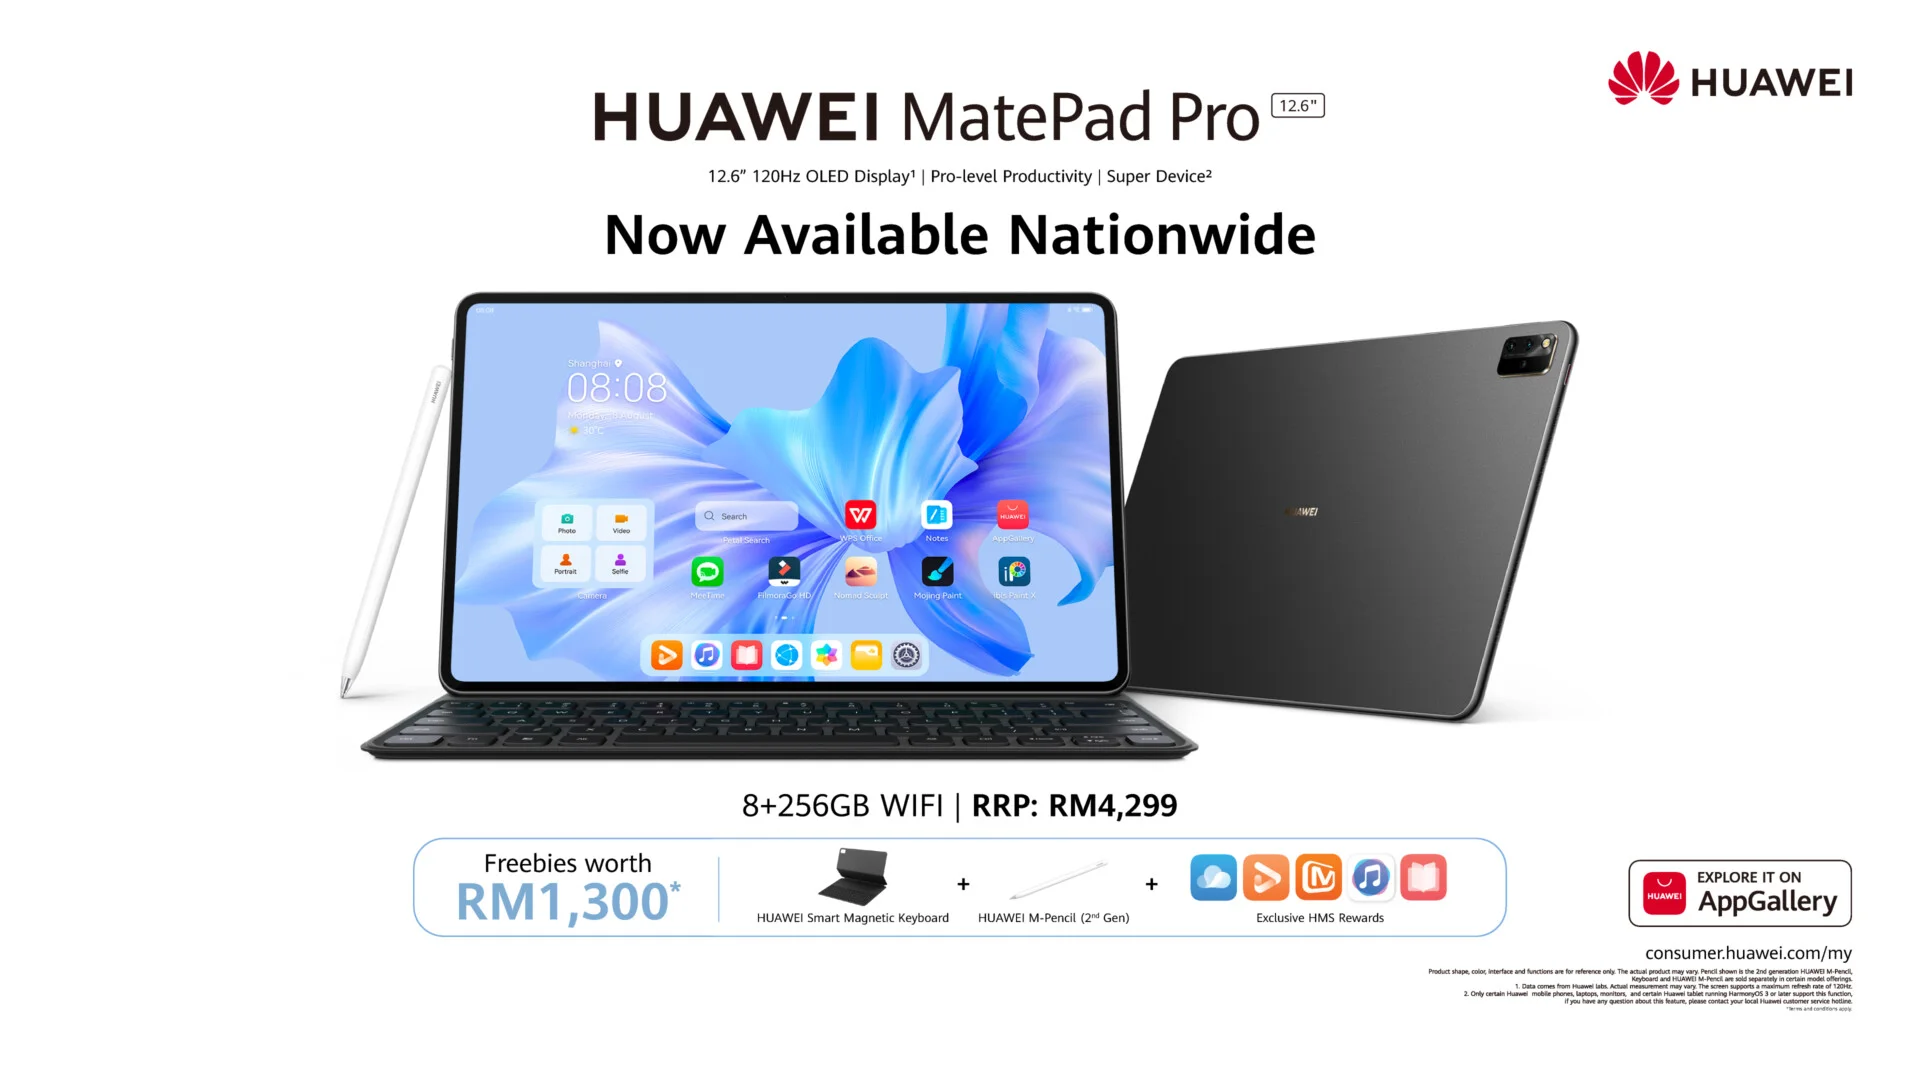 Huawei MatePad Pro 12 6 Launching In Malaysia This Friday At RM 4 299 - 93